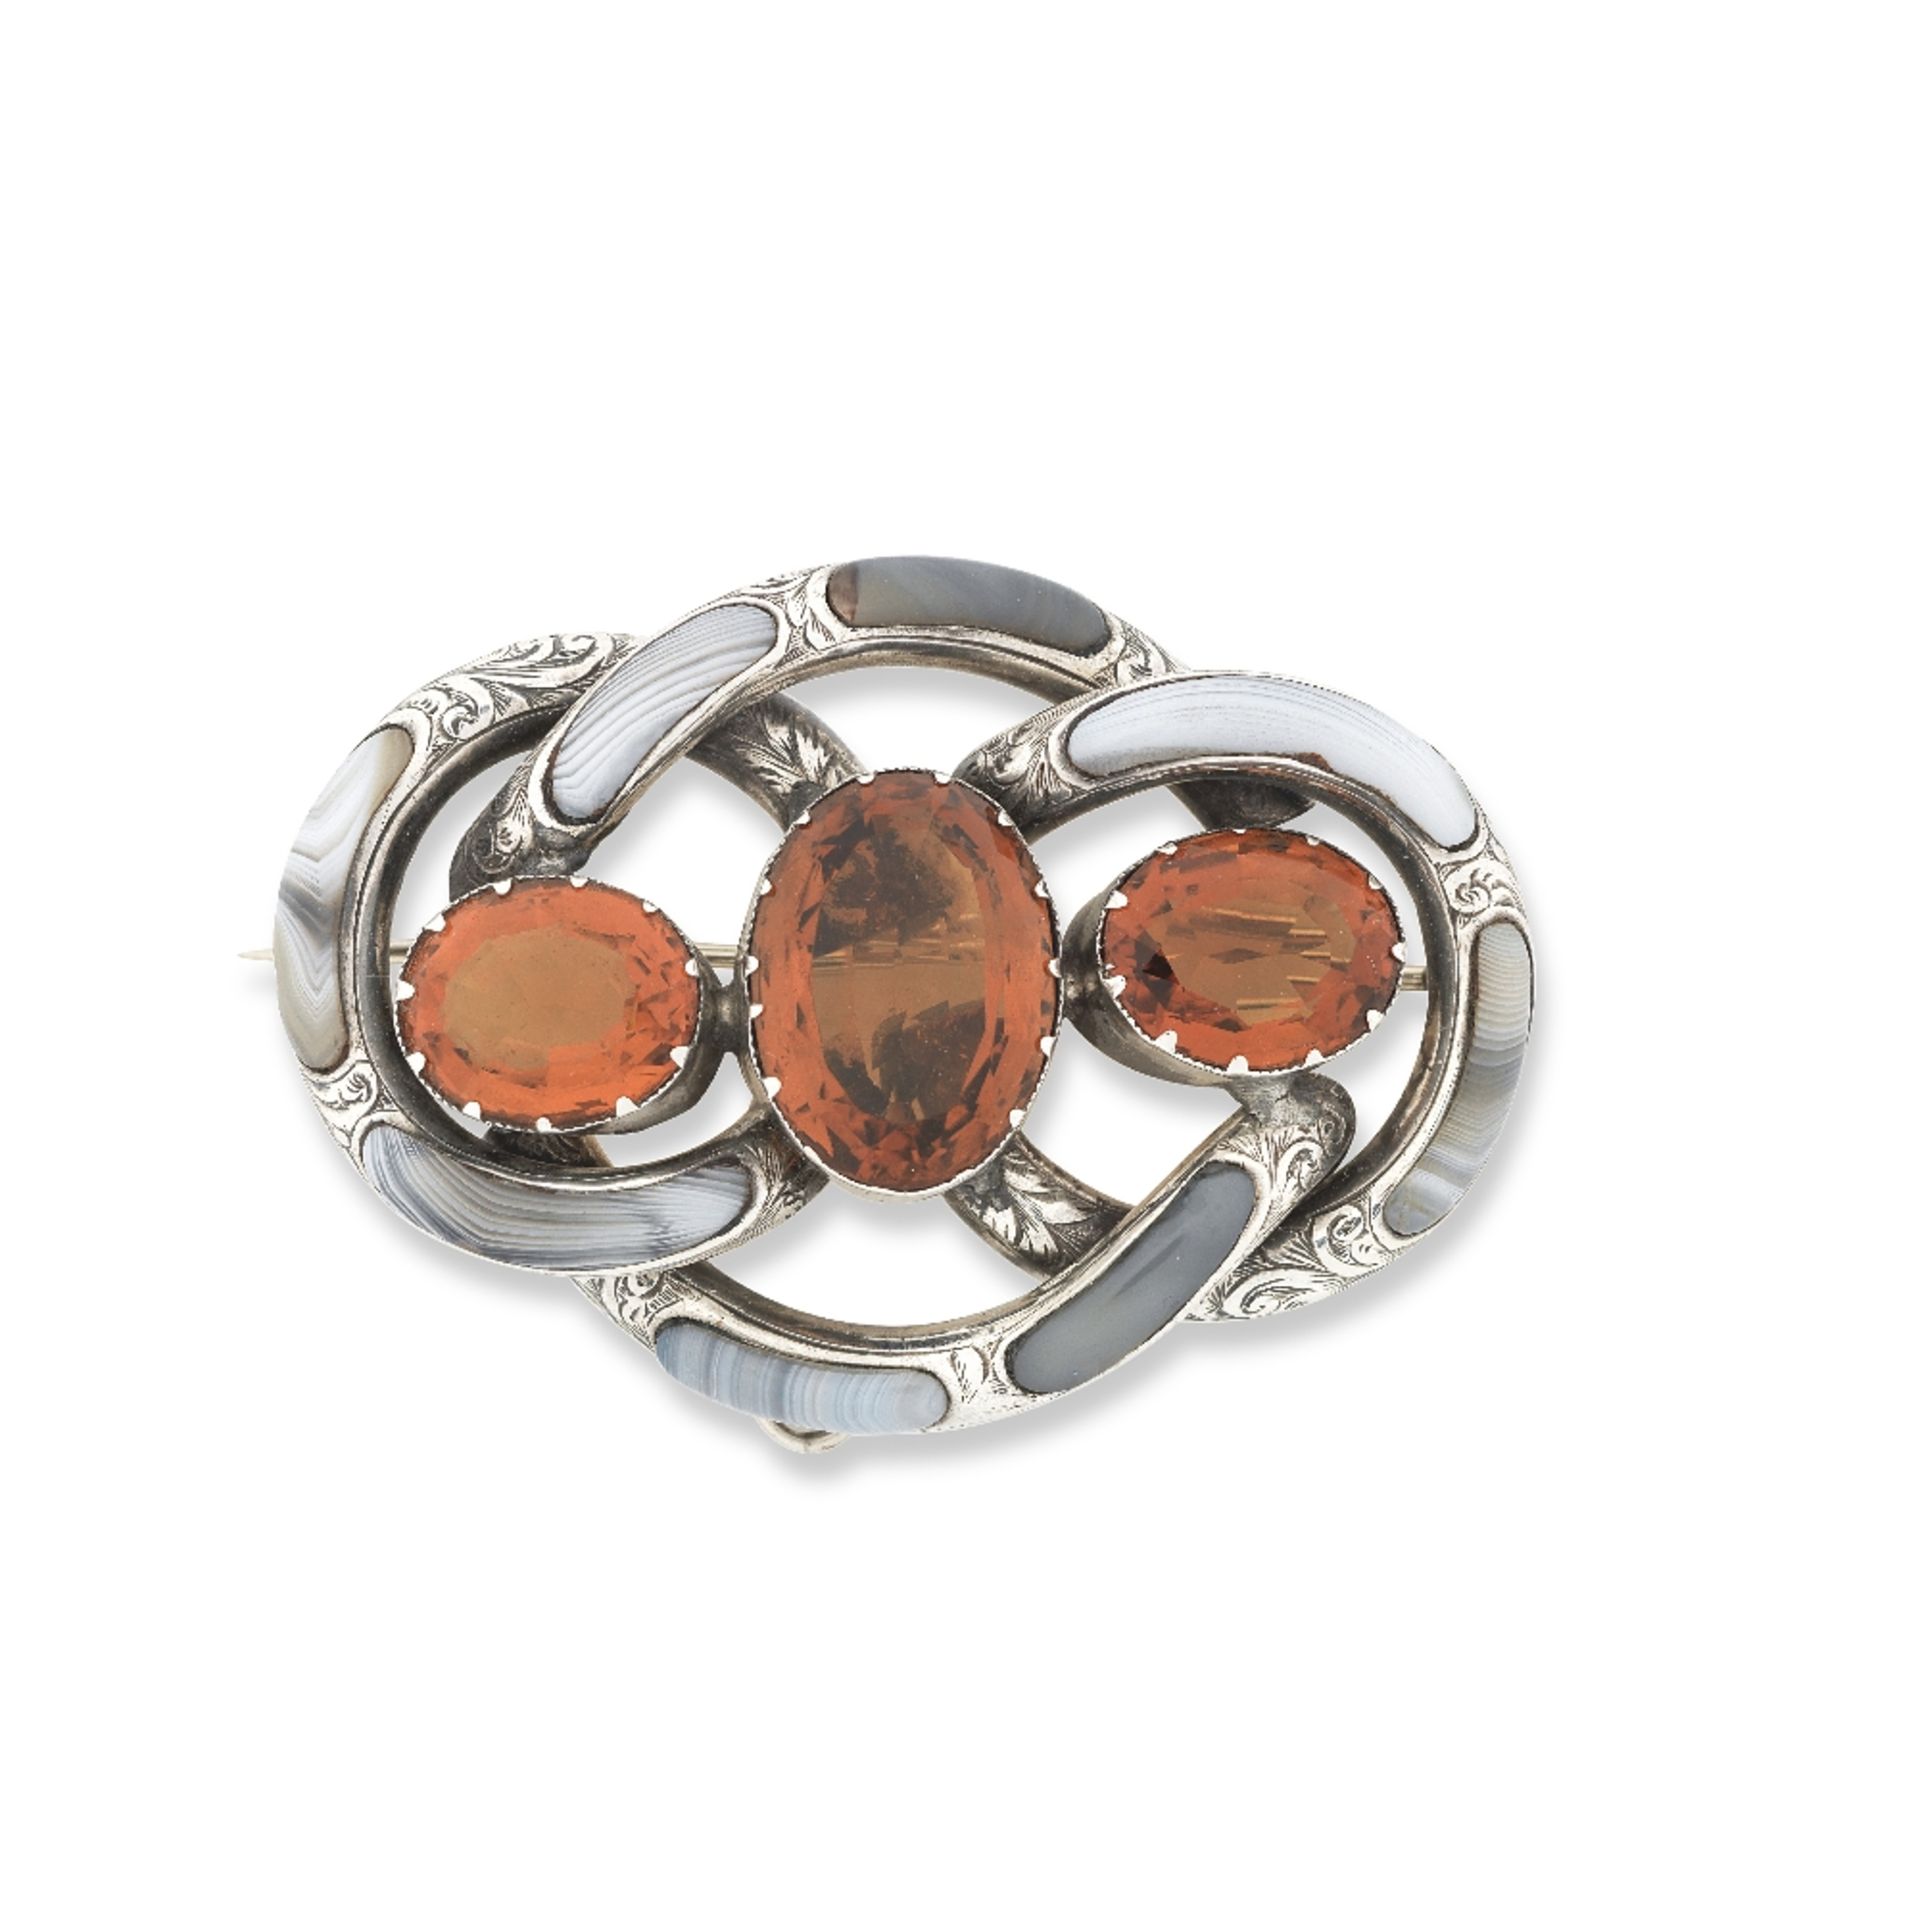 A silver, citrine and hardstone pendant/brooch, Victorian